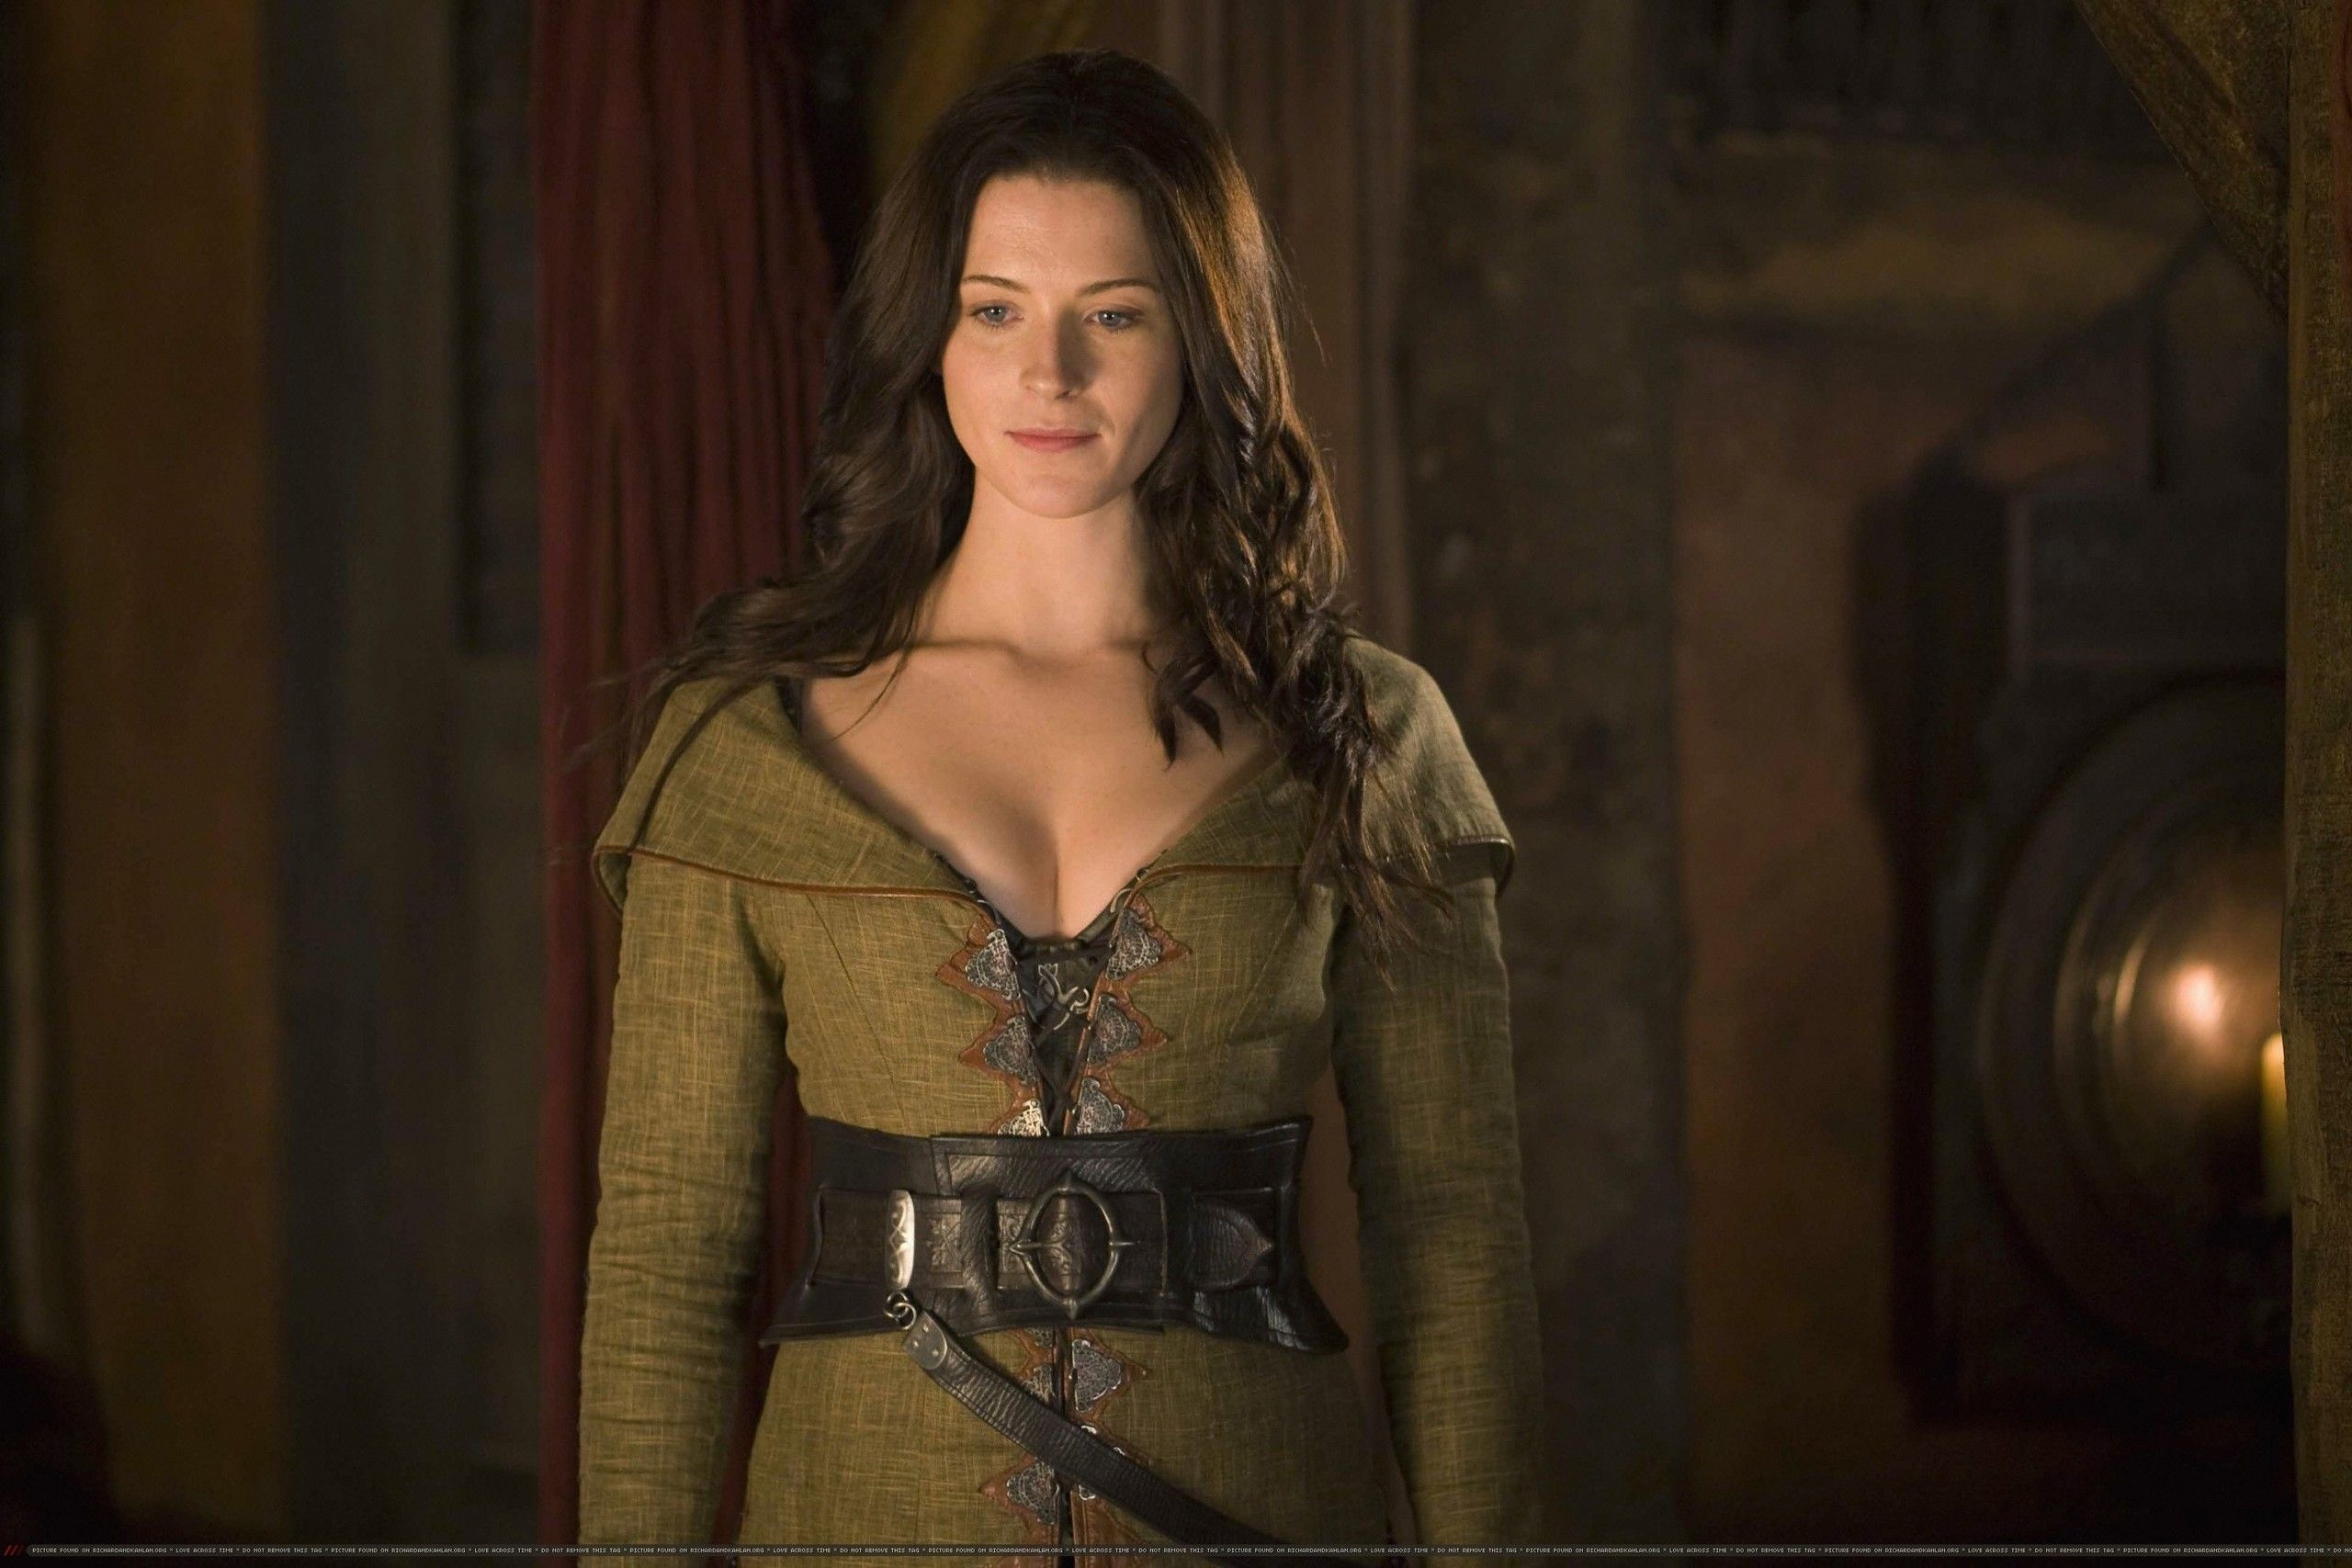 Legend of the Seeker (TV Series): Kahlan Amnell, The leading character played by Bridget Regan. 2560x1710 HD Wallpaper.